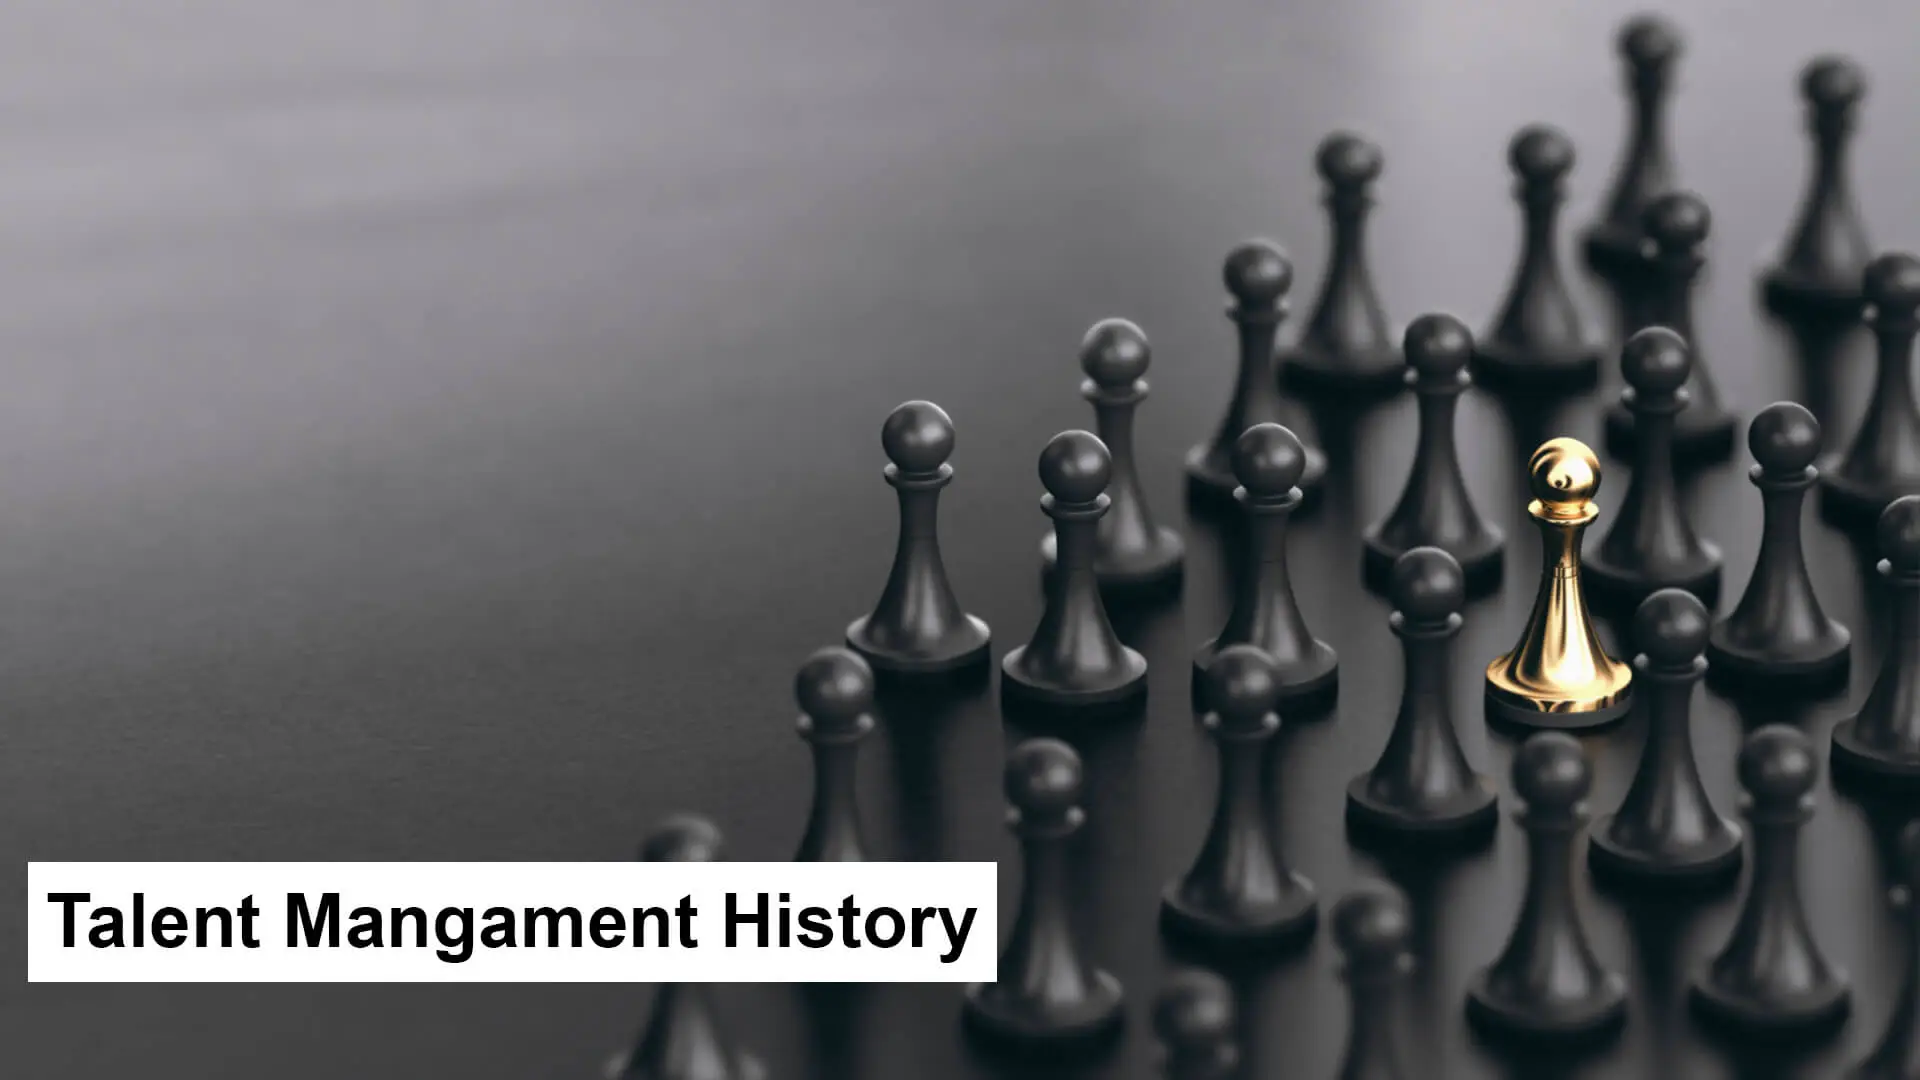 History of Talent Management